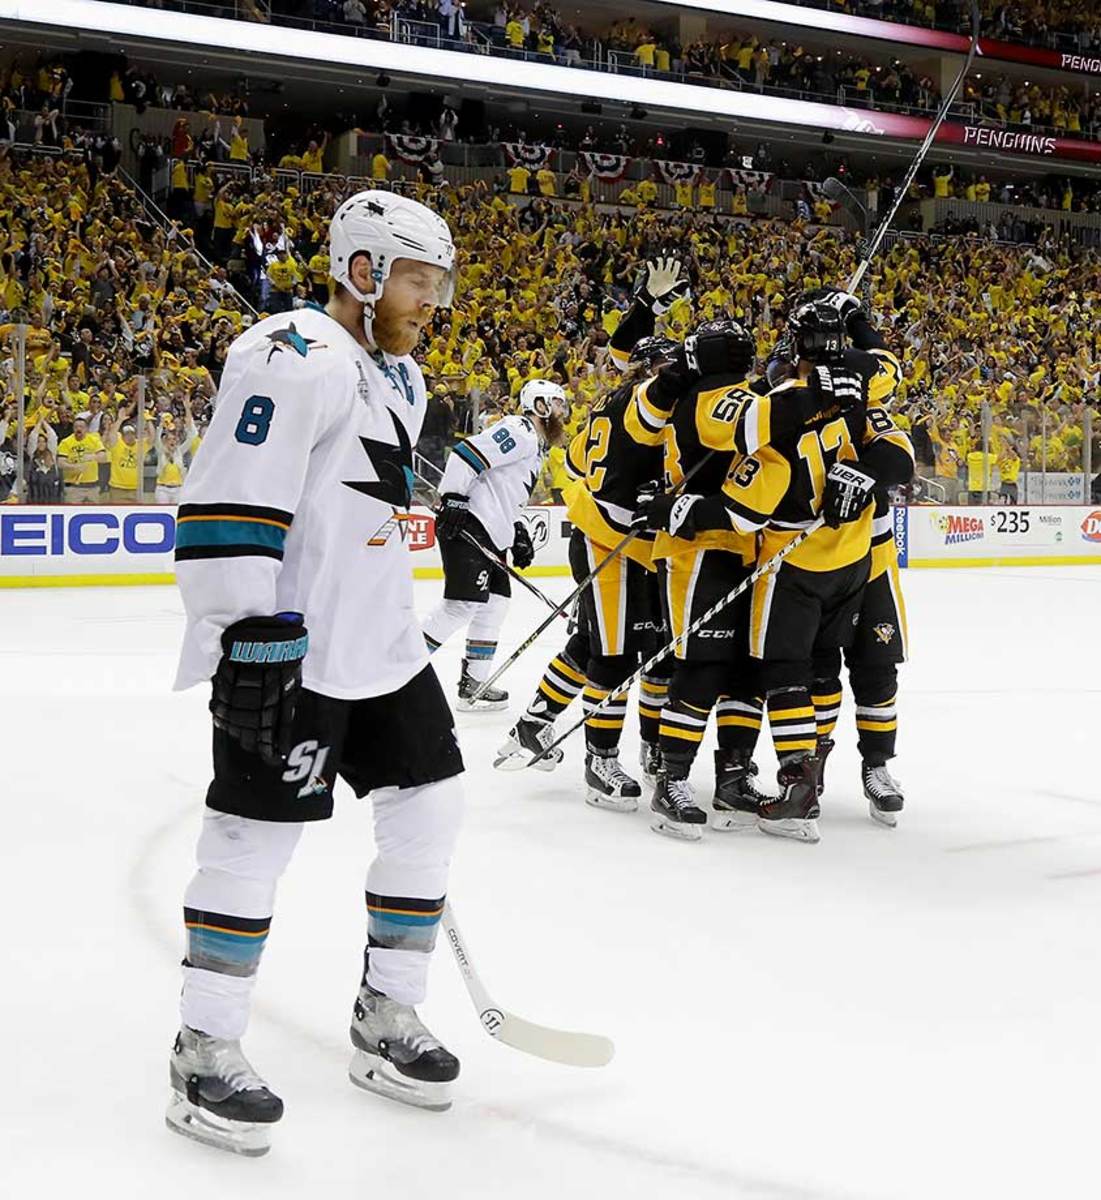 Game-1-Stanley-Cup-Finals-pictures-535940084_master.jpg